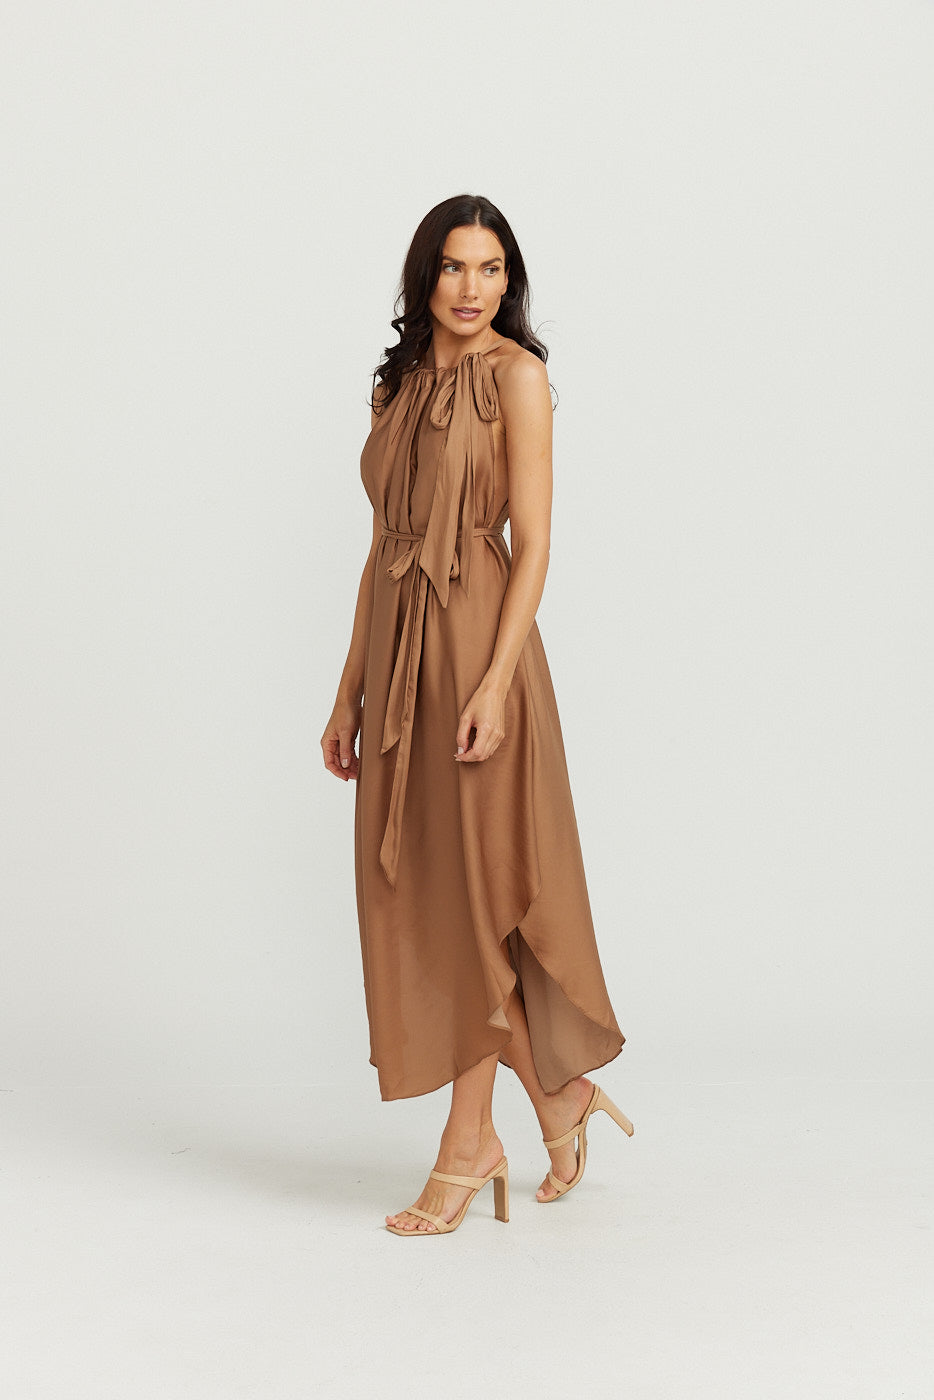 MULTI WEARING DRESS / TAN / PRE ORDER ONLY - available MID MAY